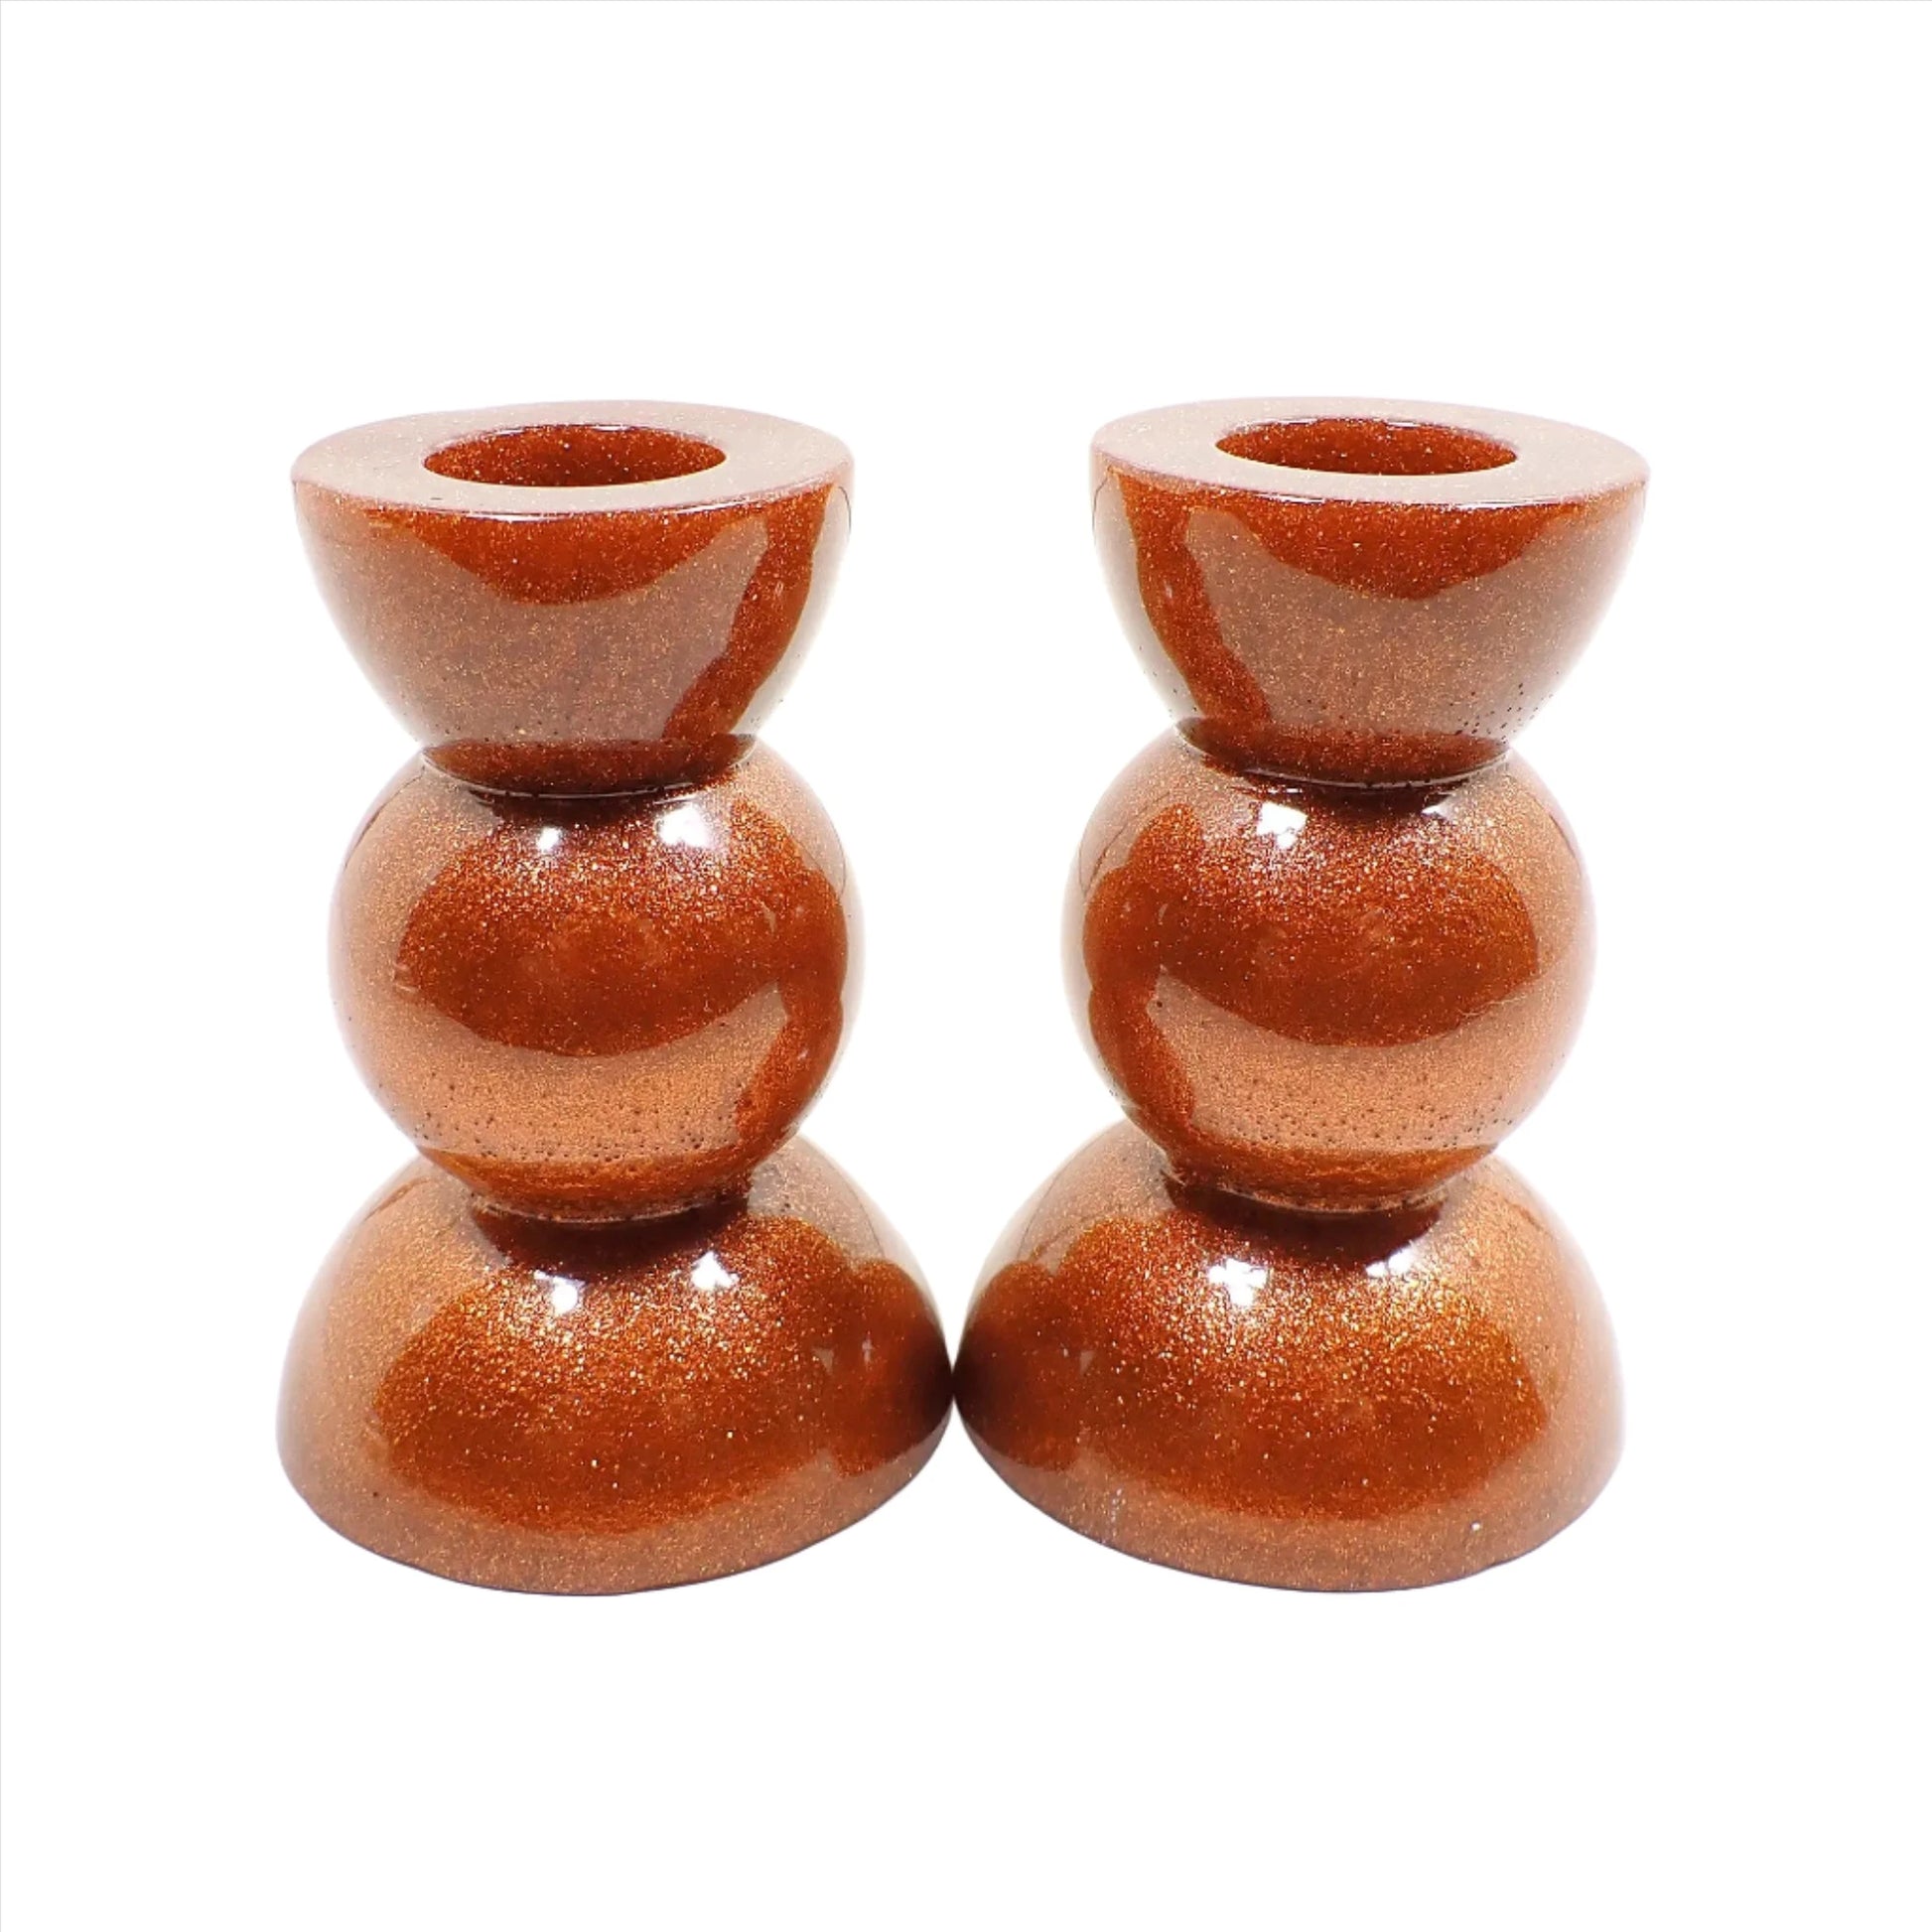 Side view of the handmade geometric candlestick holders. They have three rounded areas with a flared out top and bottom. The resin is sparkly copper in color.